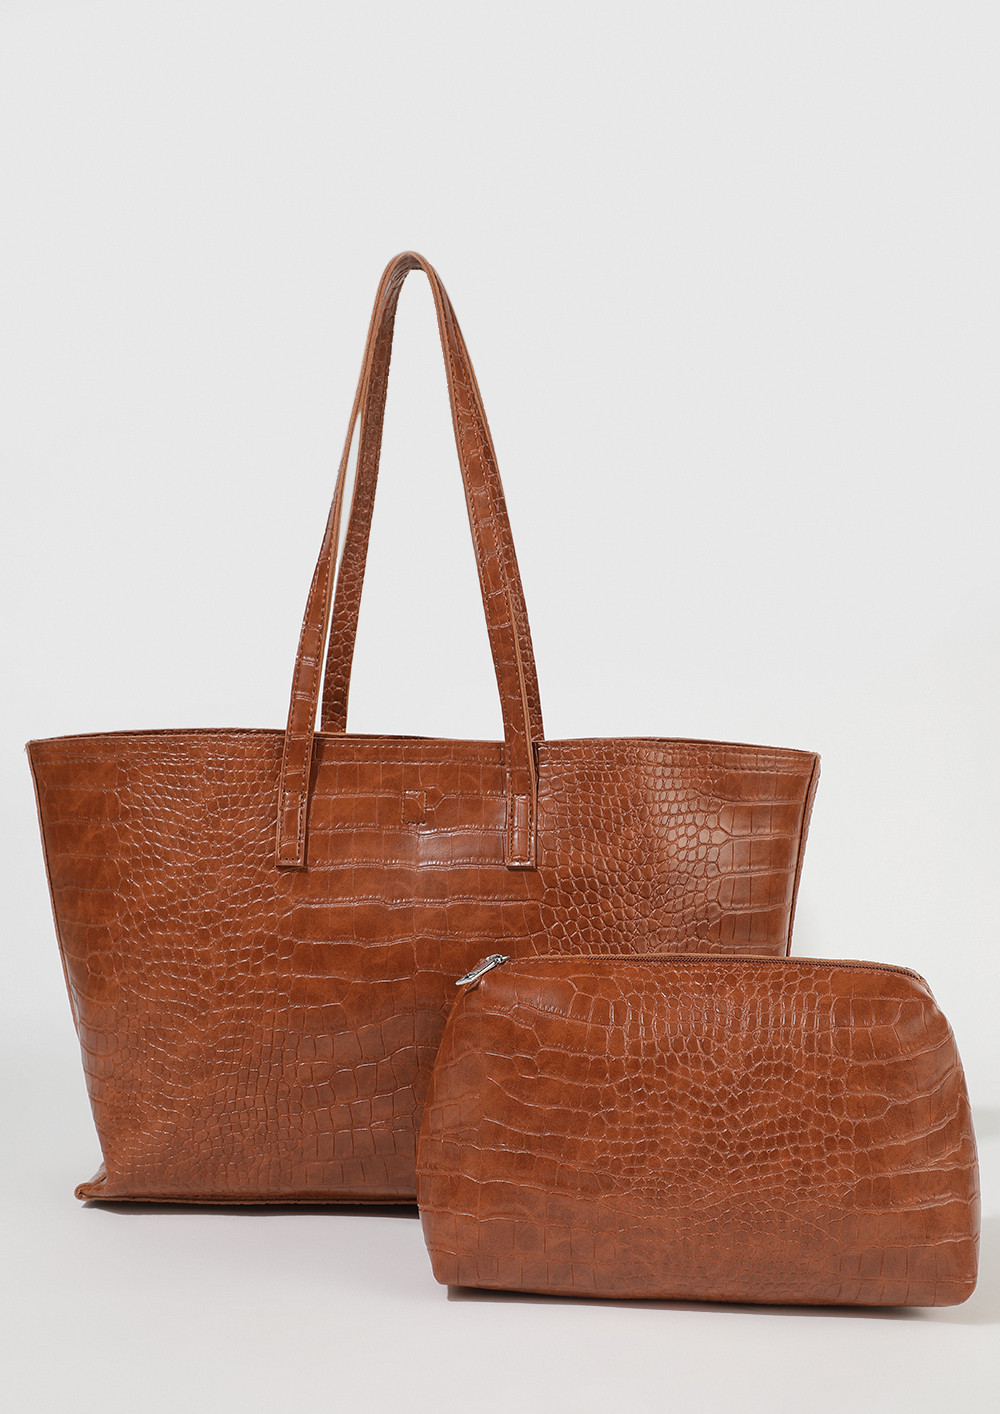 ATTENTION PLEASE TAN BROWN TOTE BAG